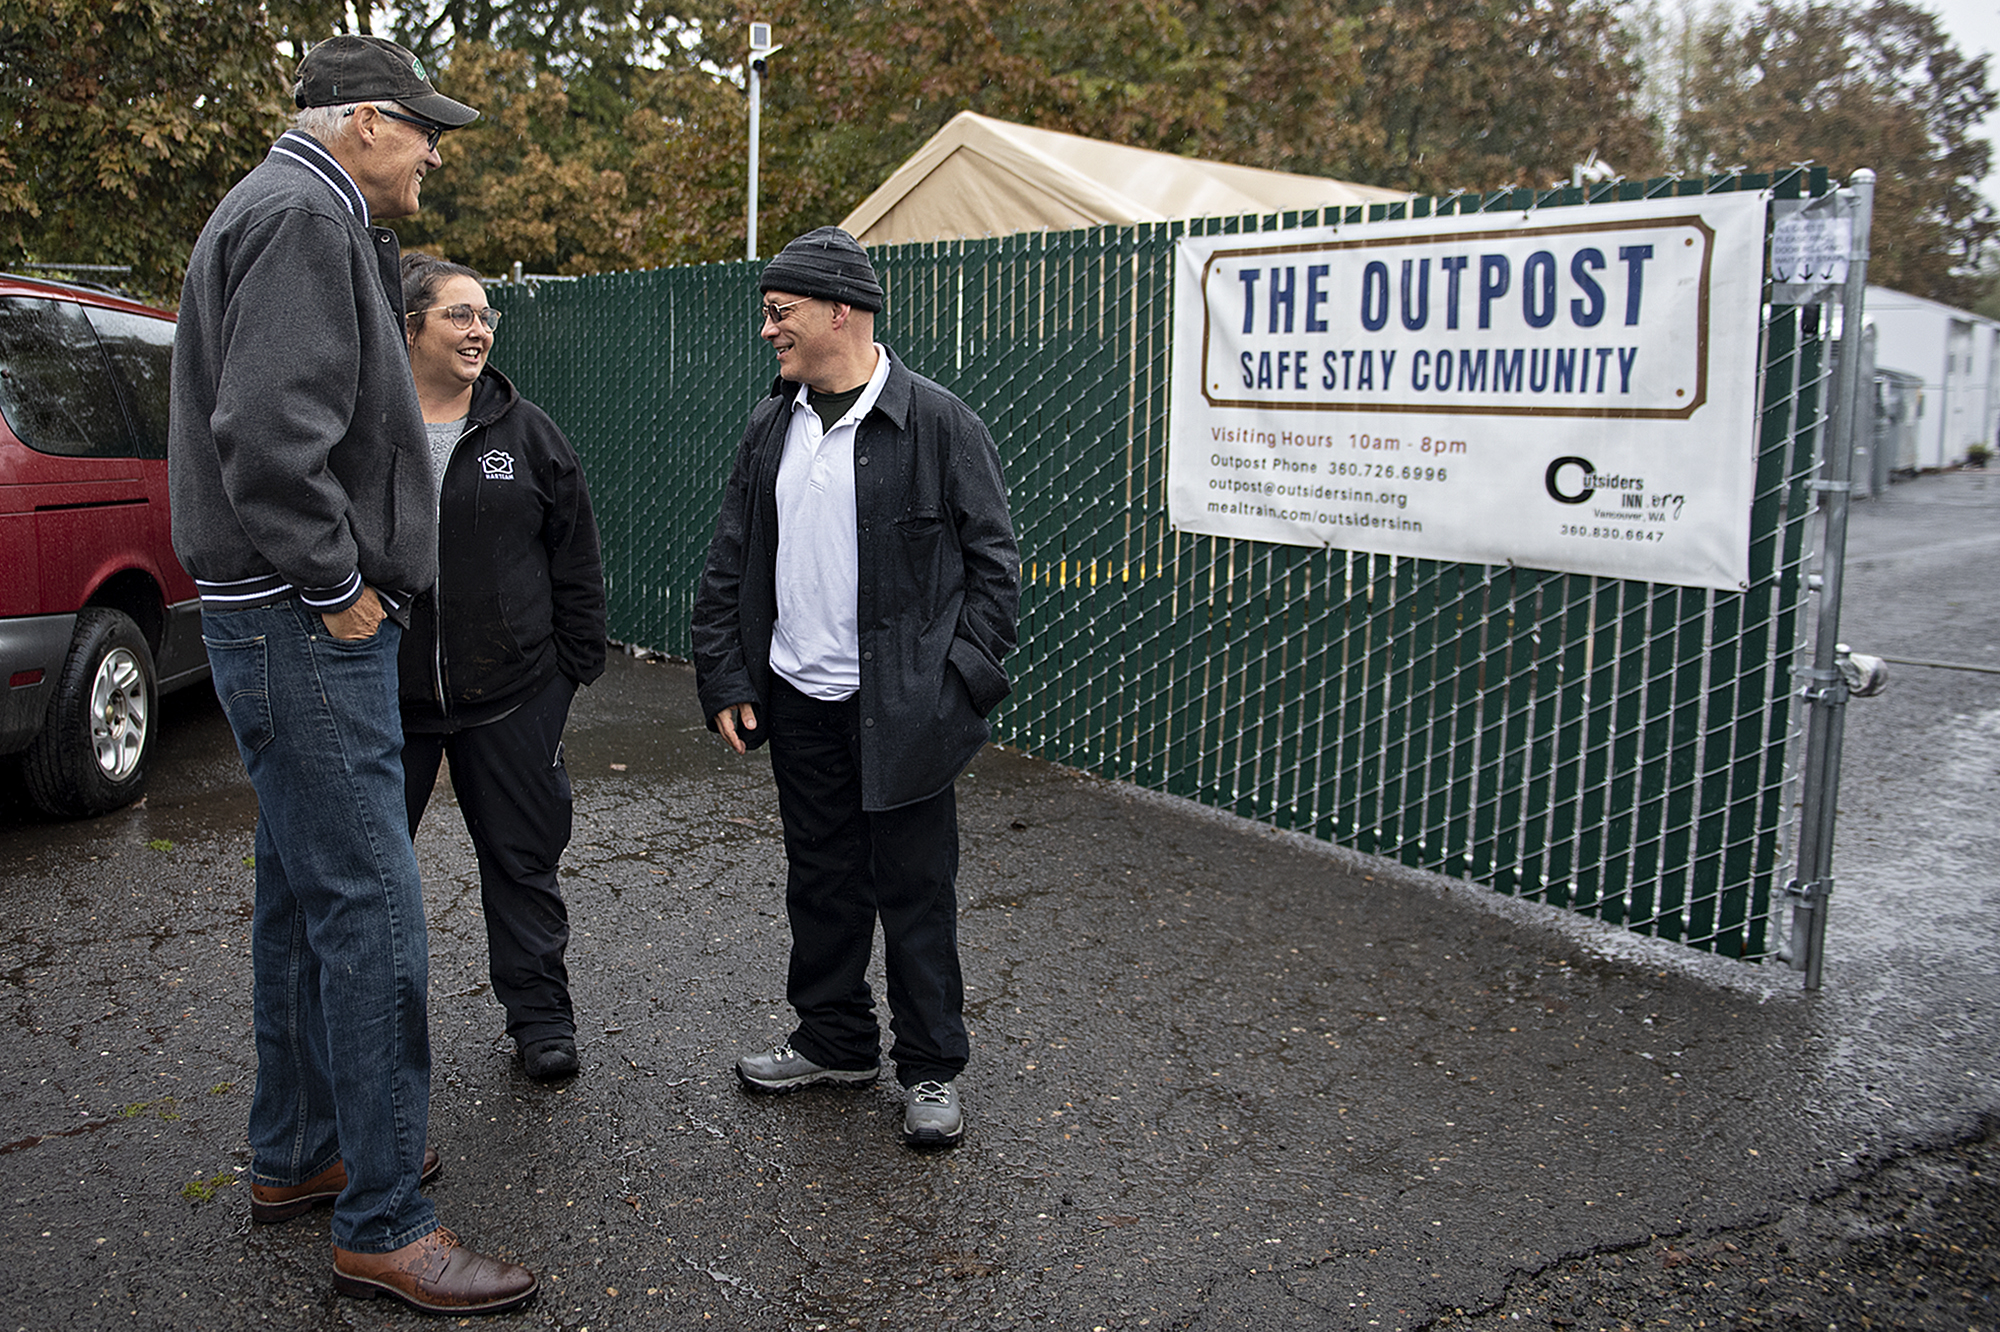 Gov. Jay Inslee, from left, talks with Jamie Spinelli, Vancouver’s Homeless Response Coordinator, and Adam Kravitz, executive director of Outsiders Inn, at the conclusion of his tour of the Outpost Safe Stay Community on Monday morning, Oct. 31, 2022.